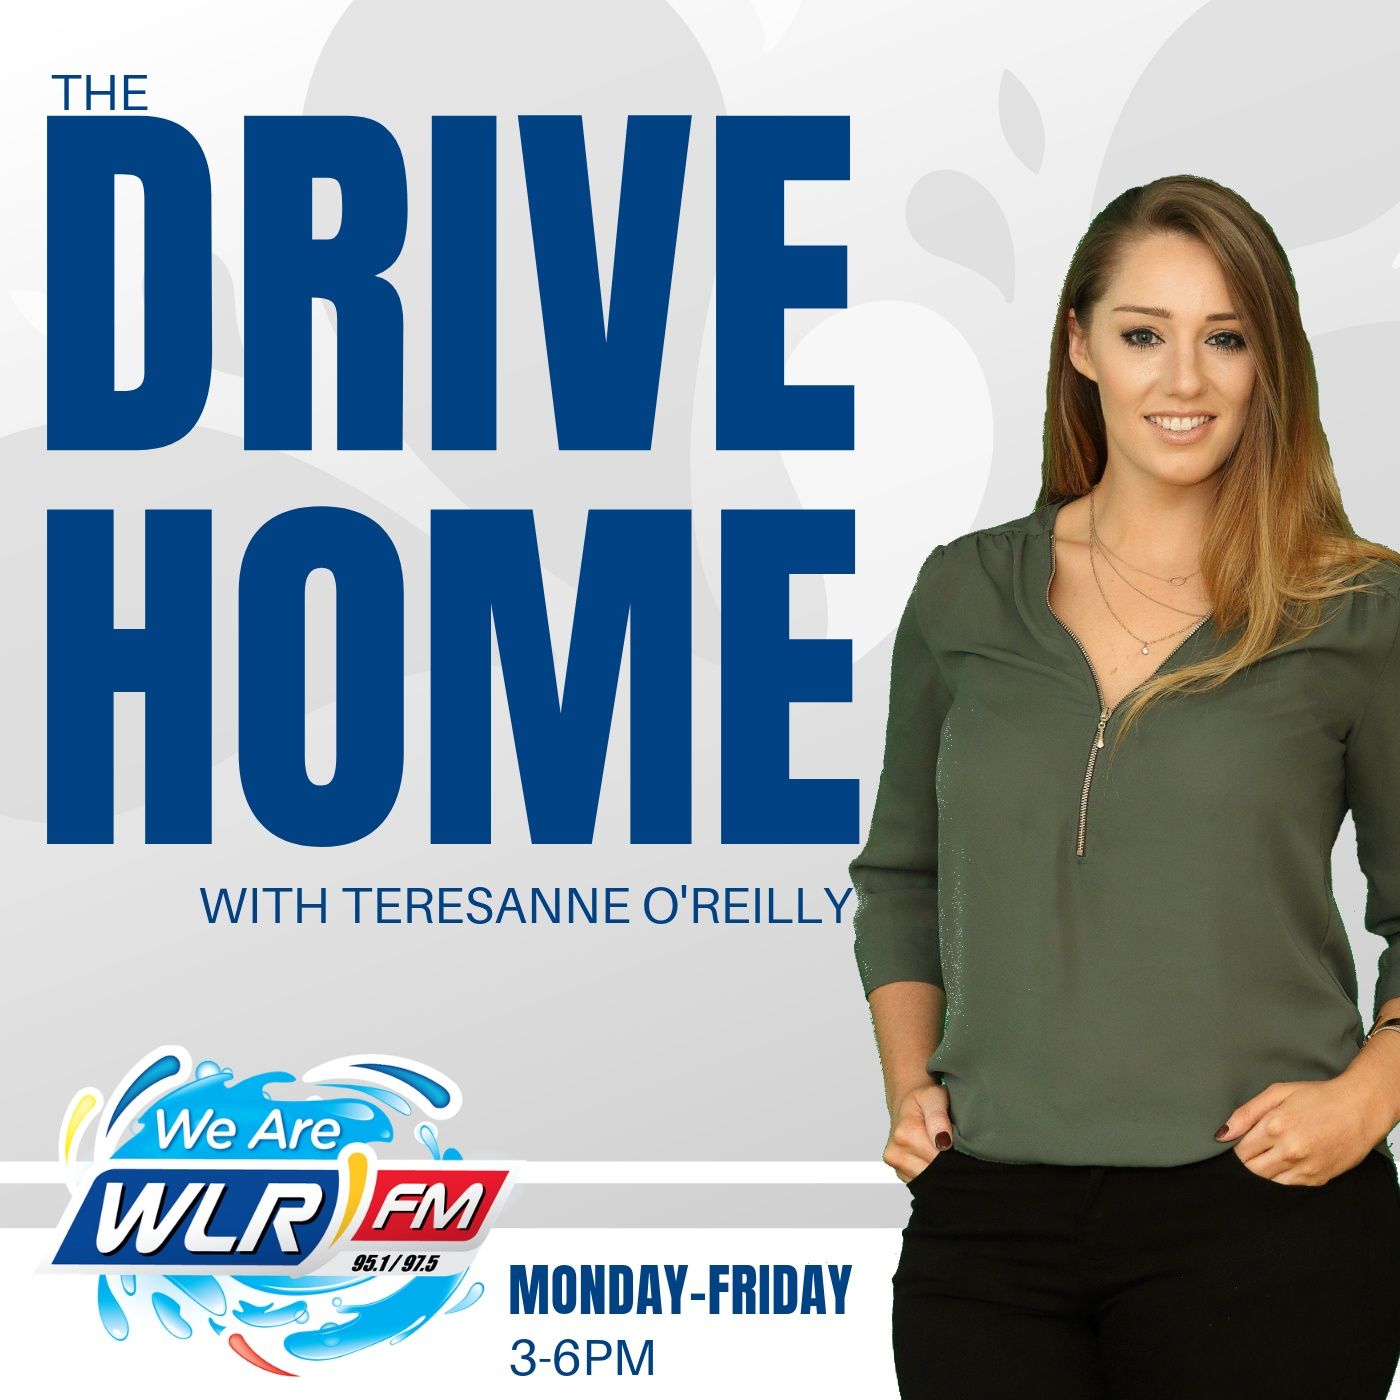 The Drive Home:WLR